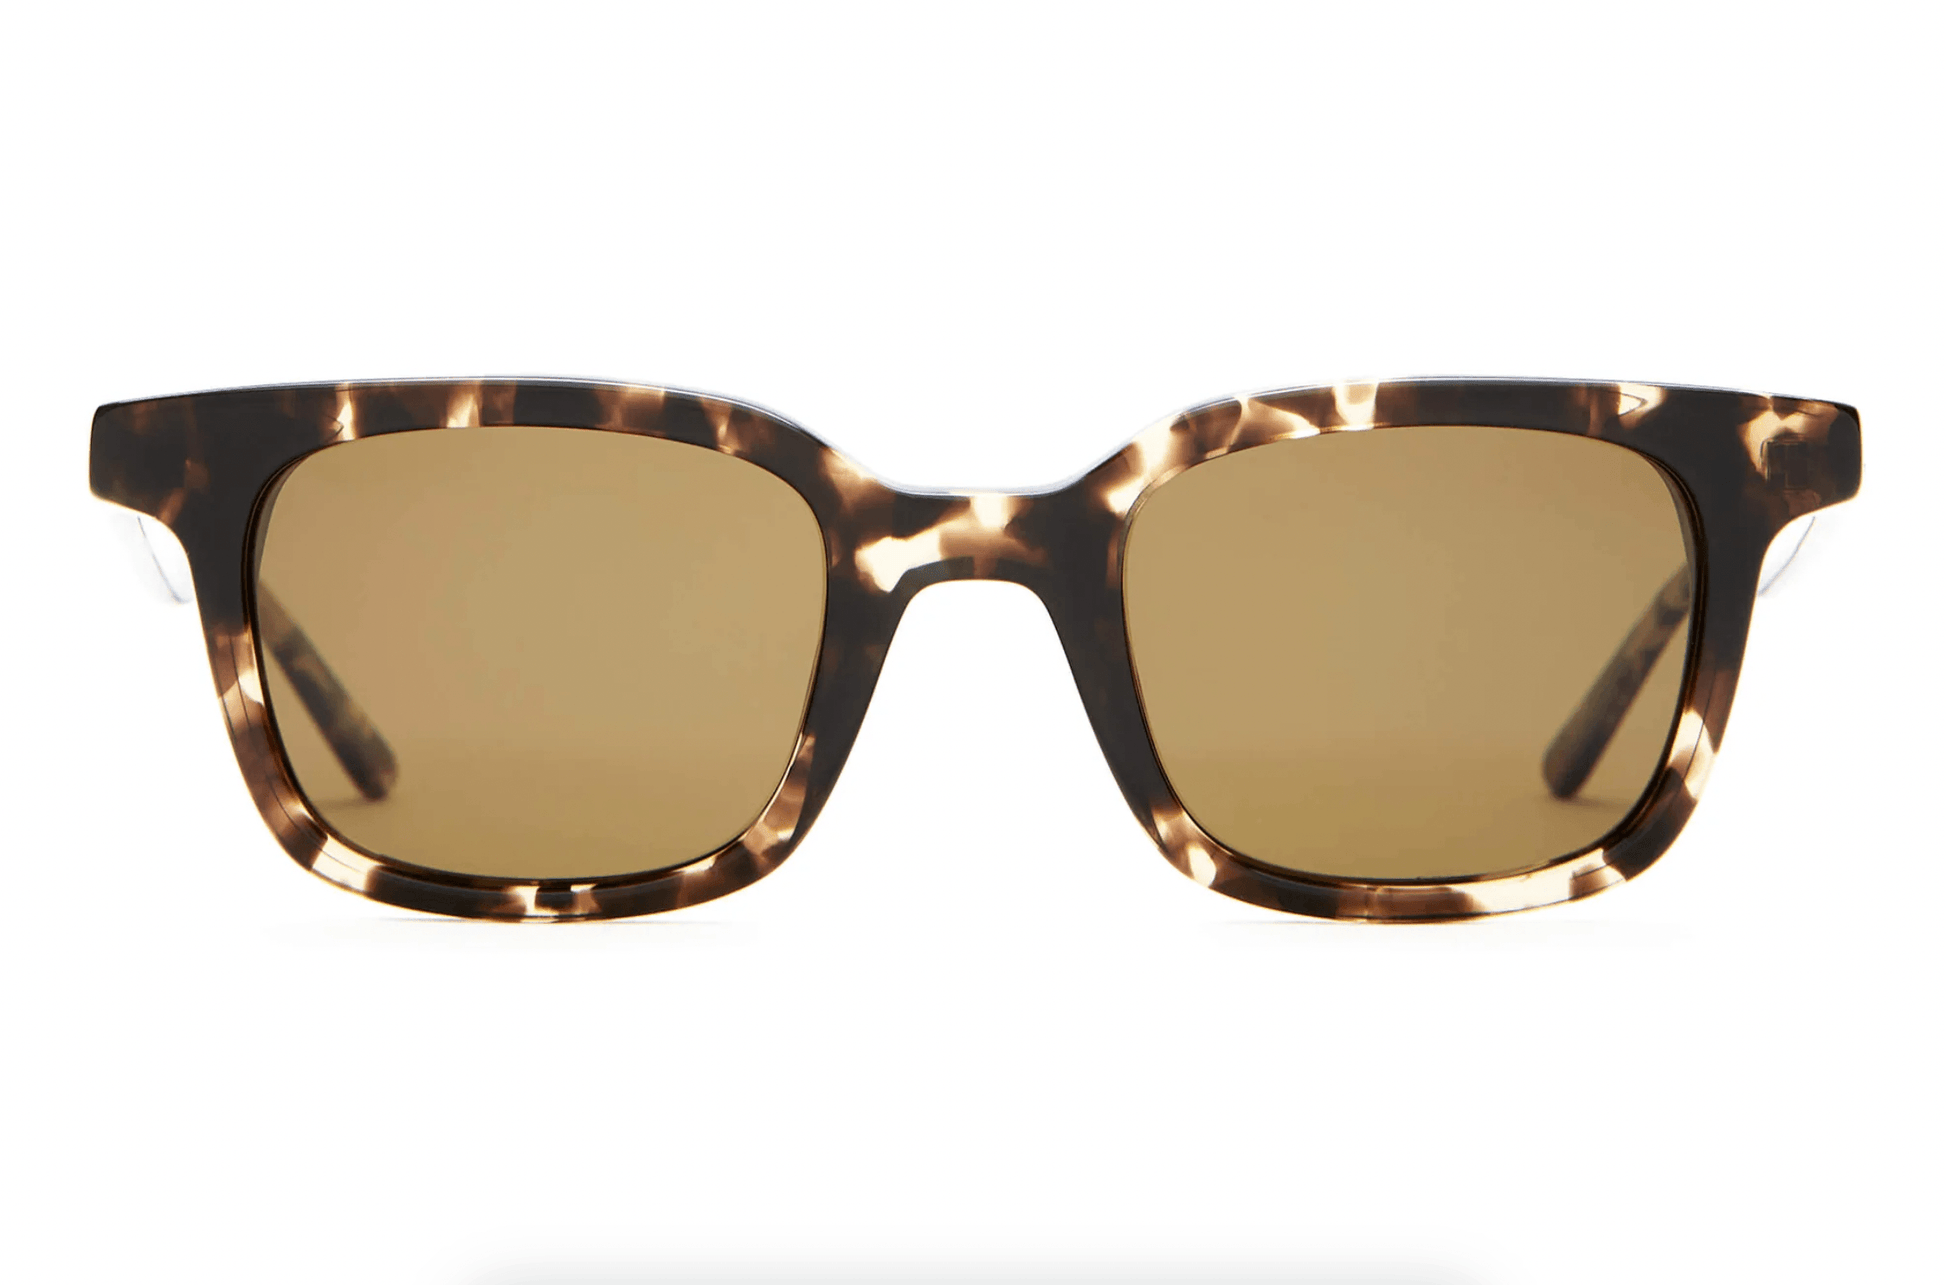 The Dropout Boogie Sunglasses by Crap Eyewear - Haven